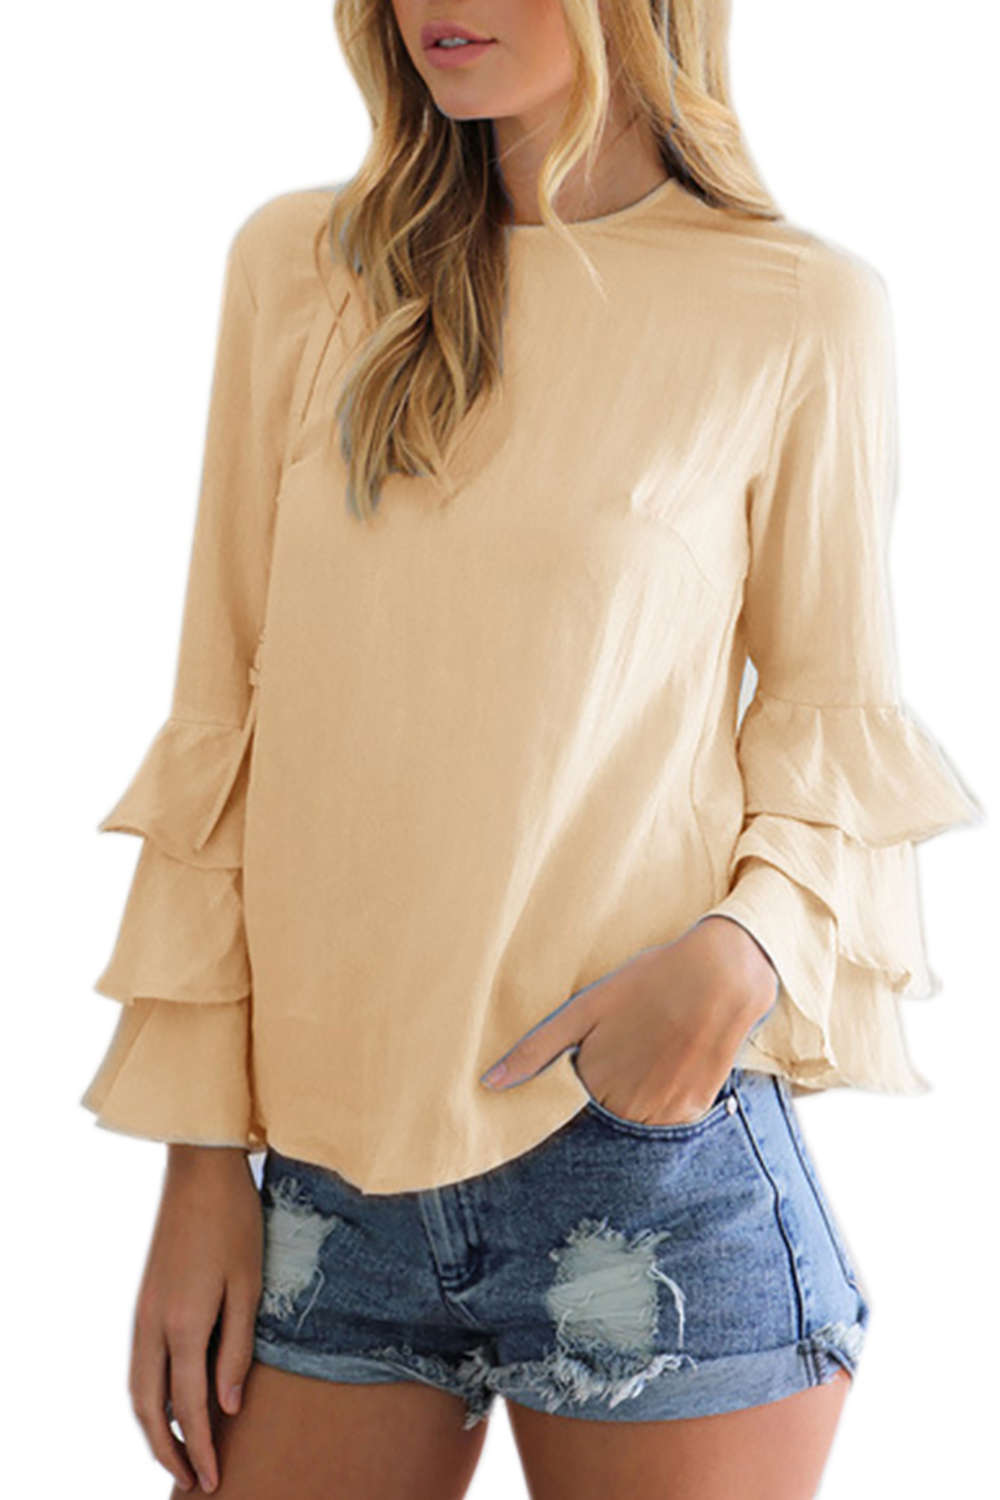 Iyasson Round Neck Bell-Sleeve Blouse Top